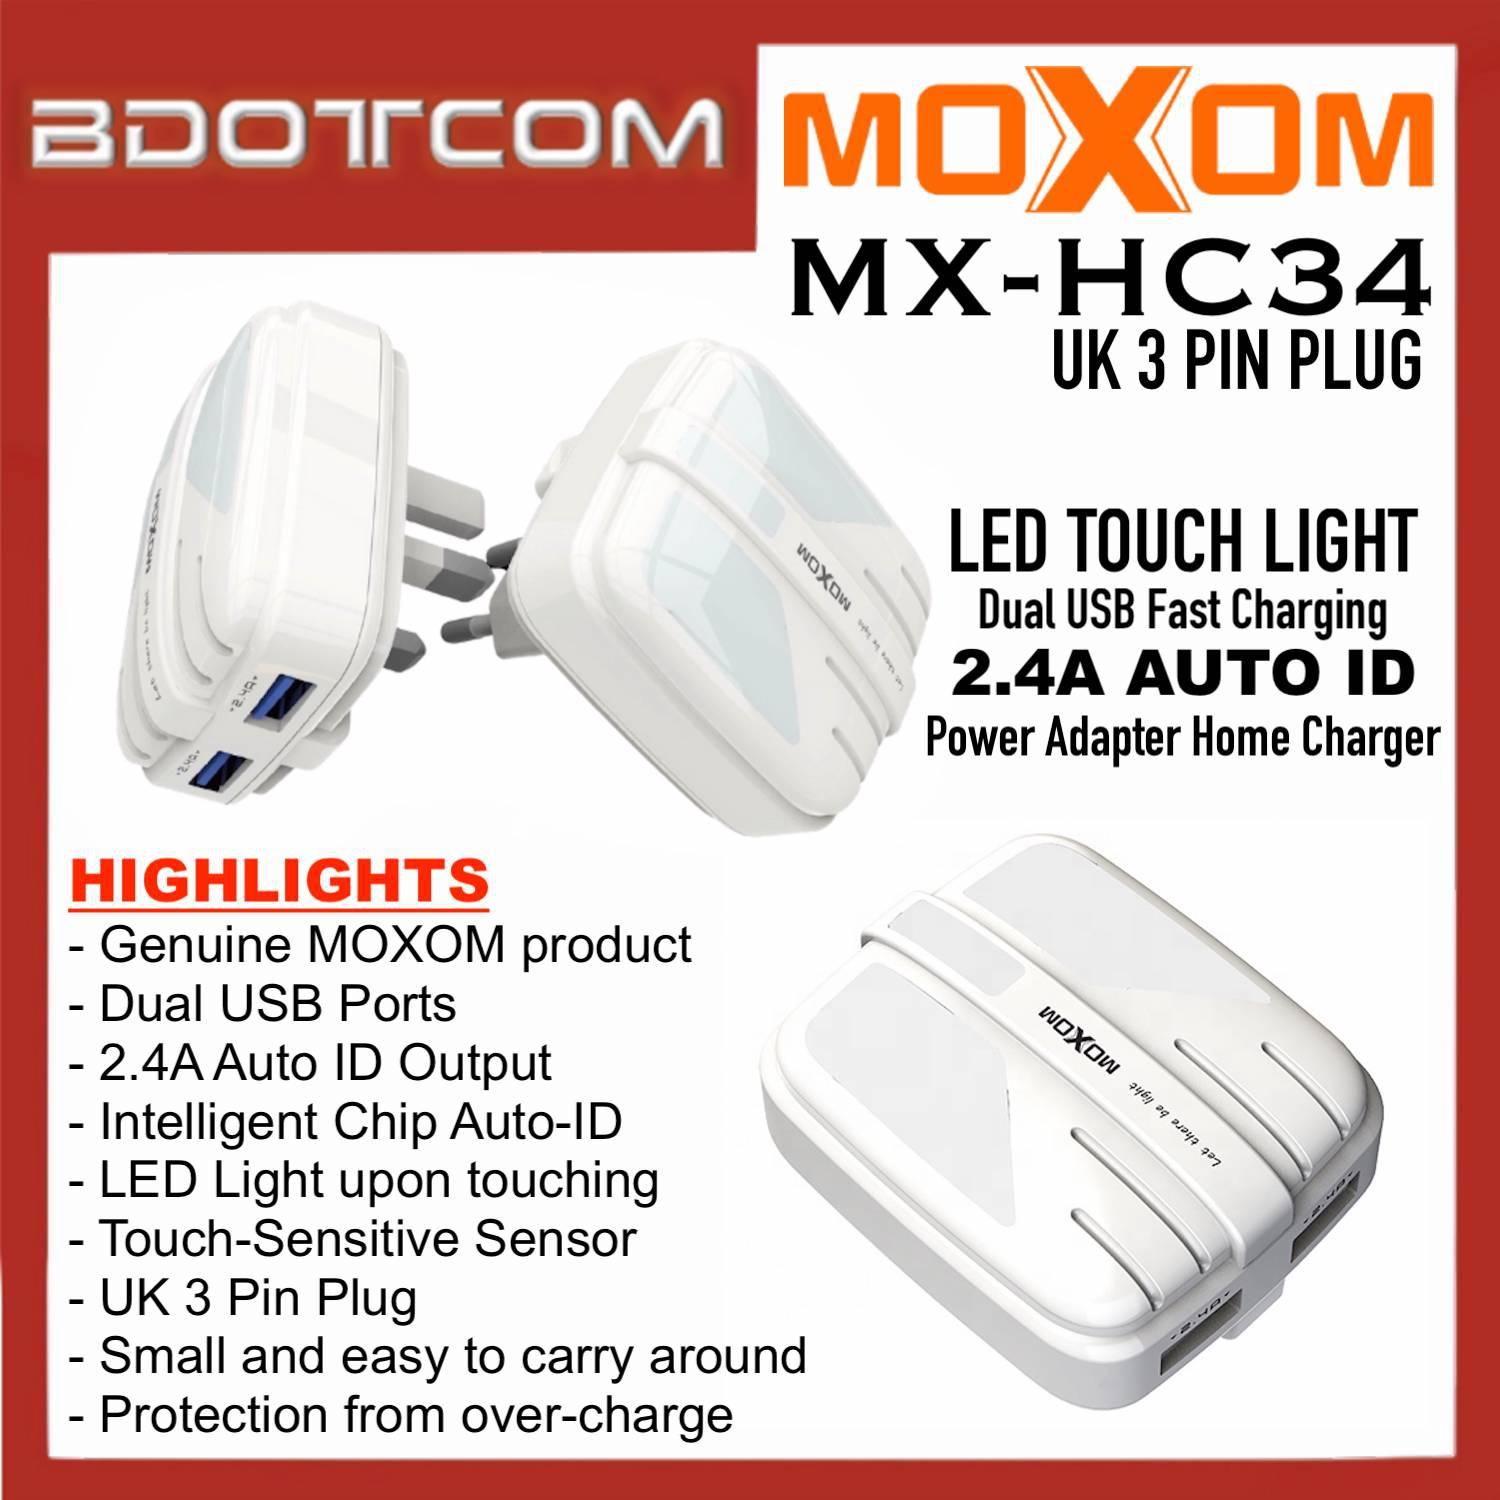 MOXOM MX-HC32 Dual USB 2.4A AUTO ID Power Adapter Home Charger